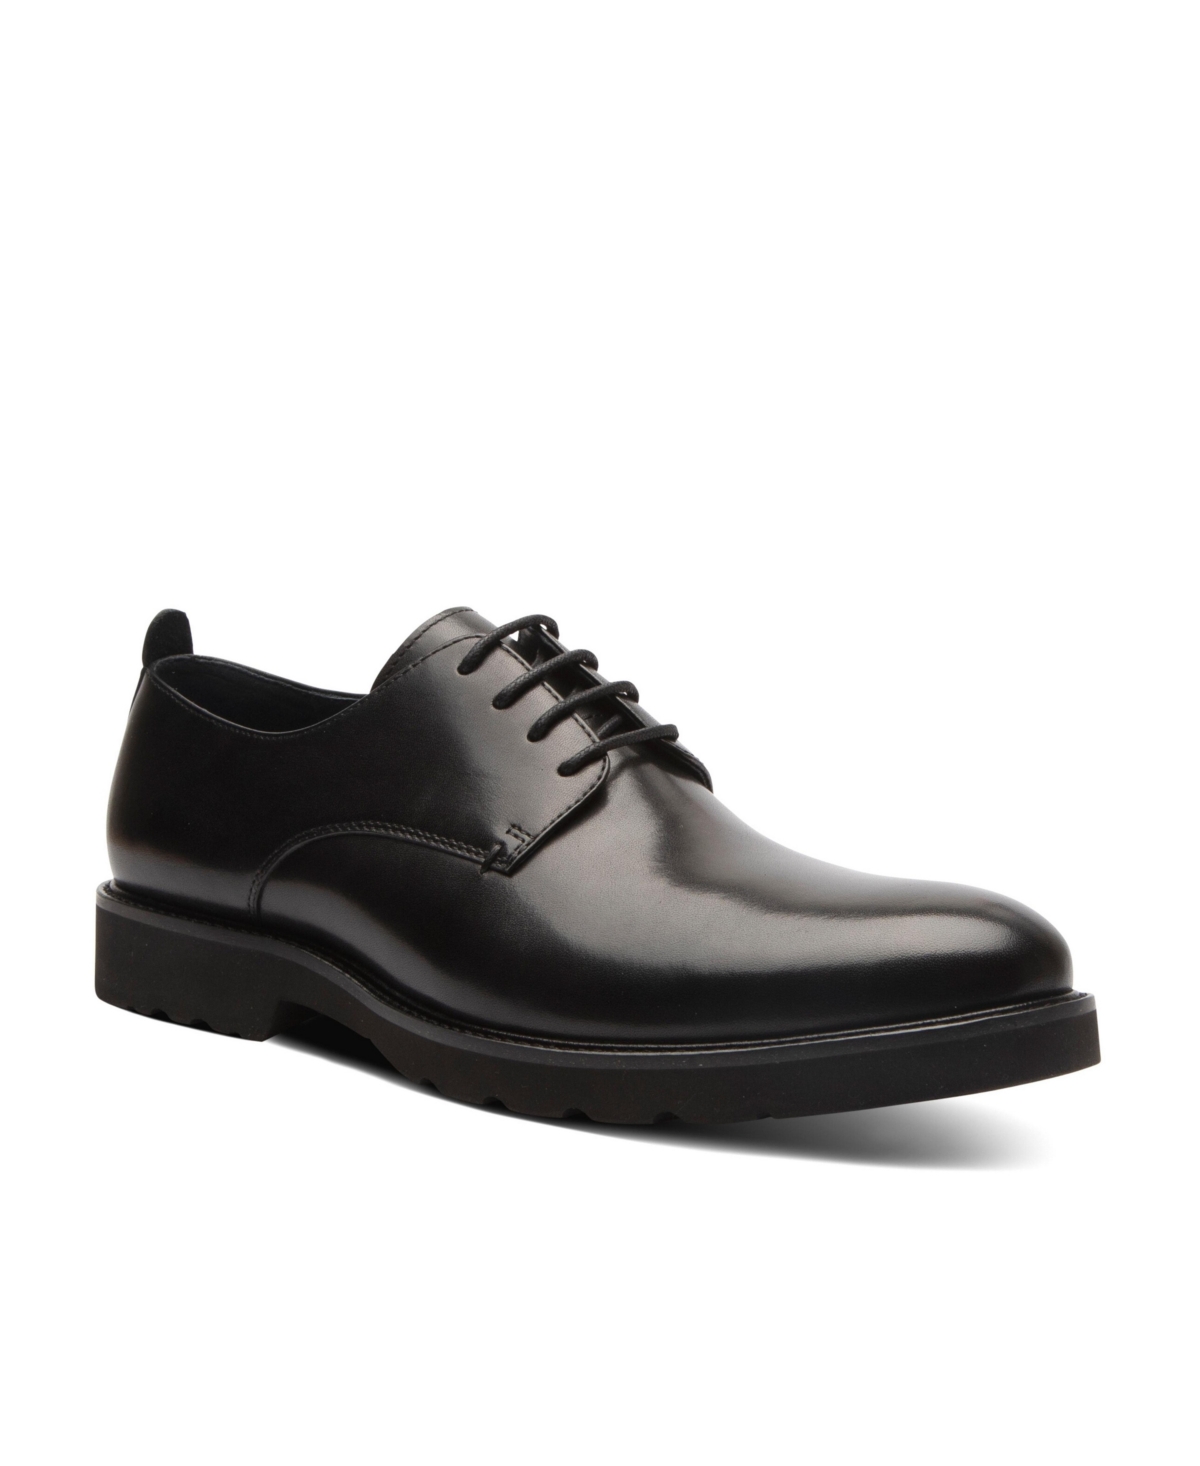 BLAKE MCKAY MEN'S POWELL OXFORD CASUAL LACE-UP PLAIN TOE LEATHER SHOES